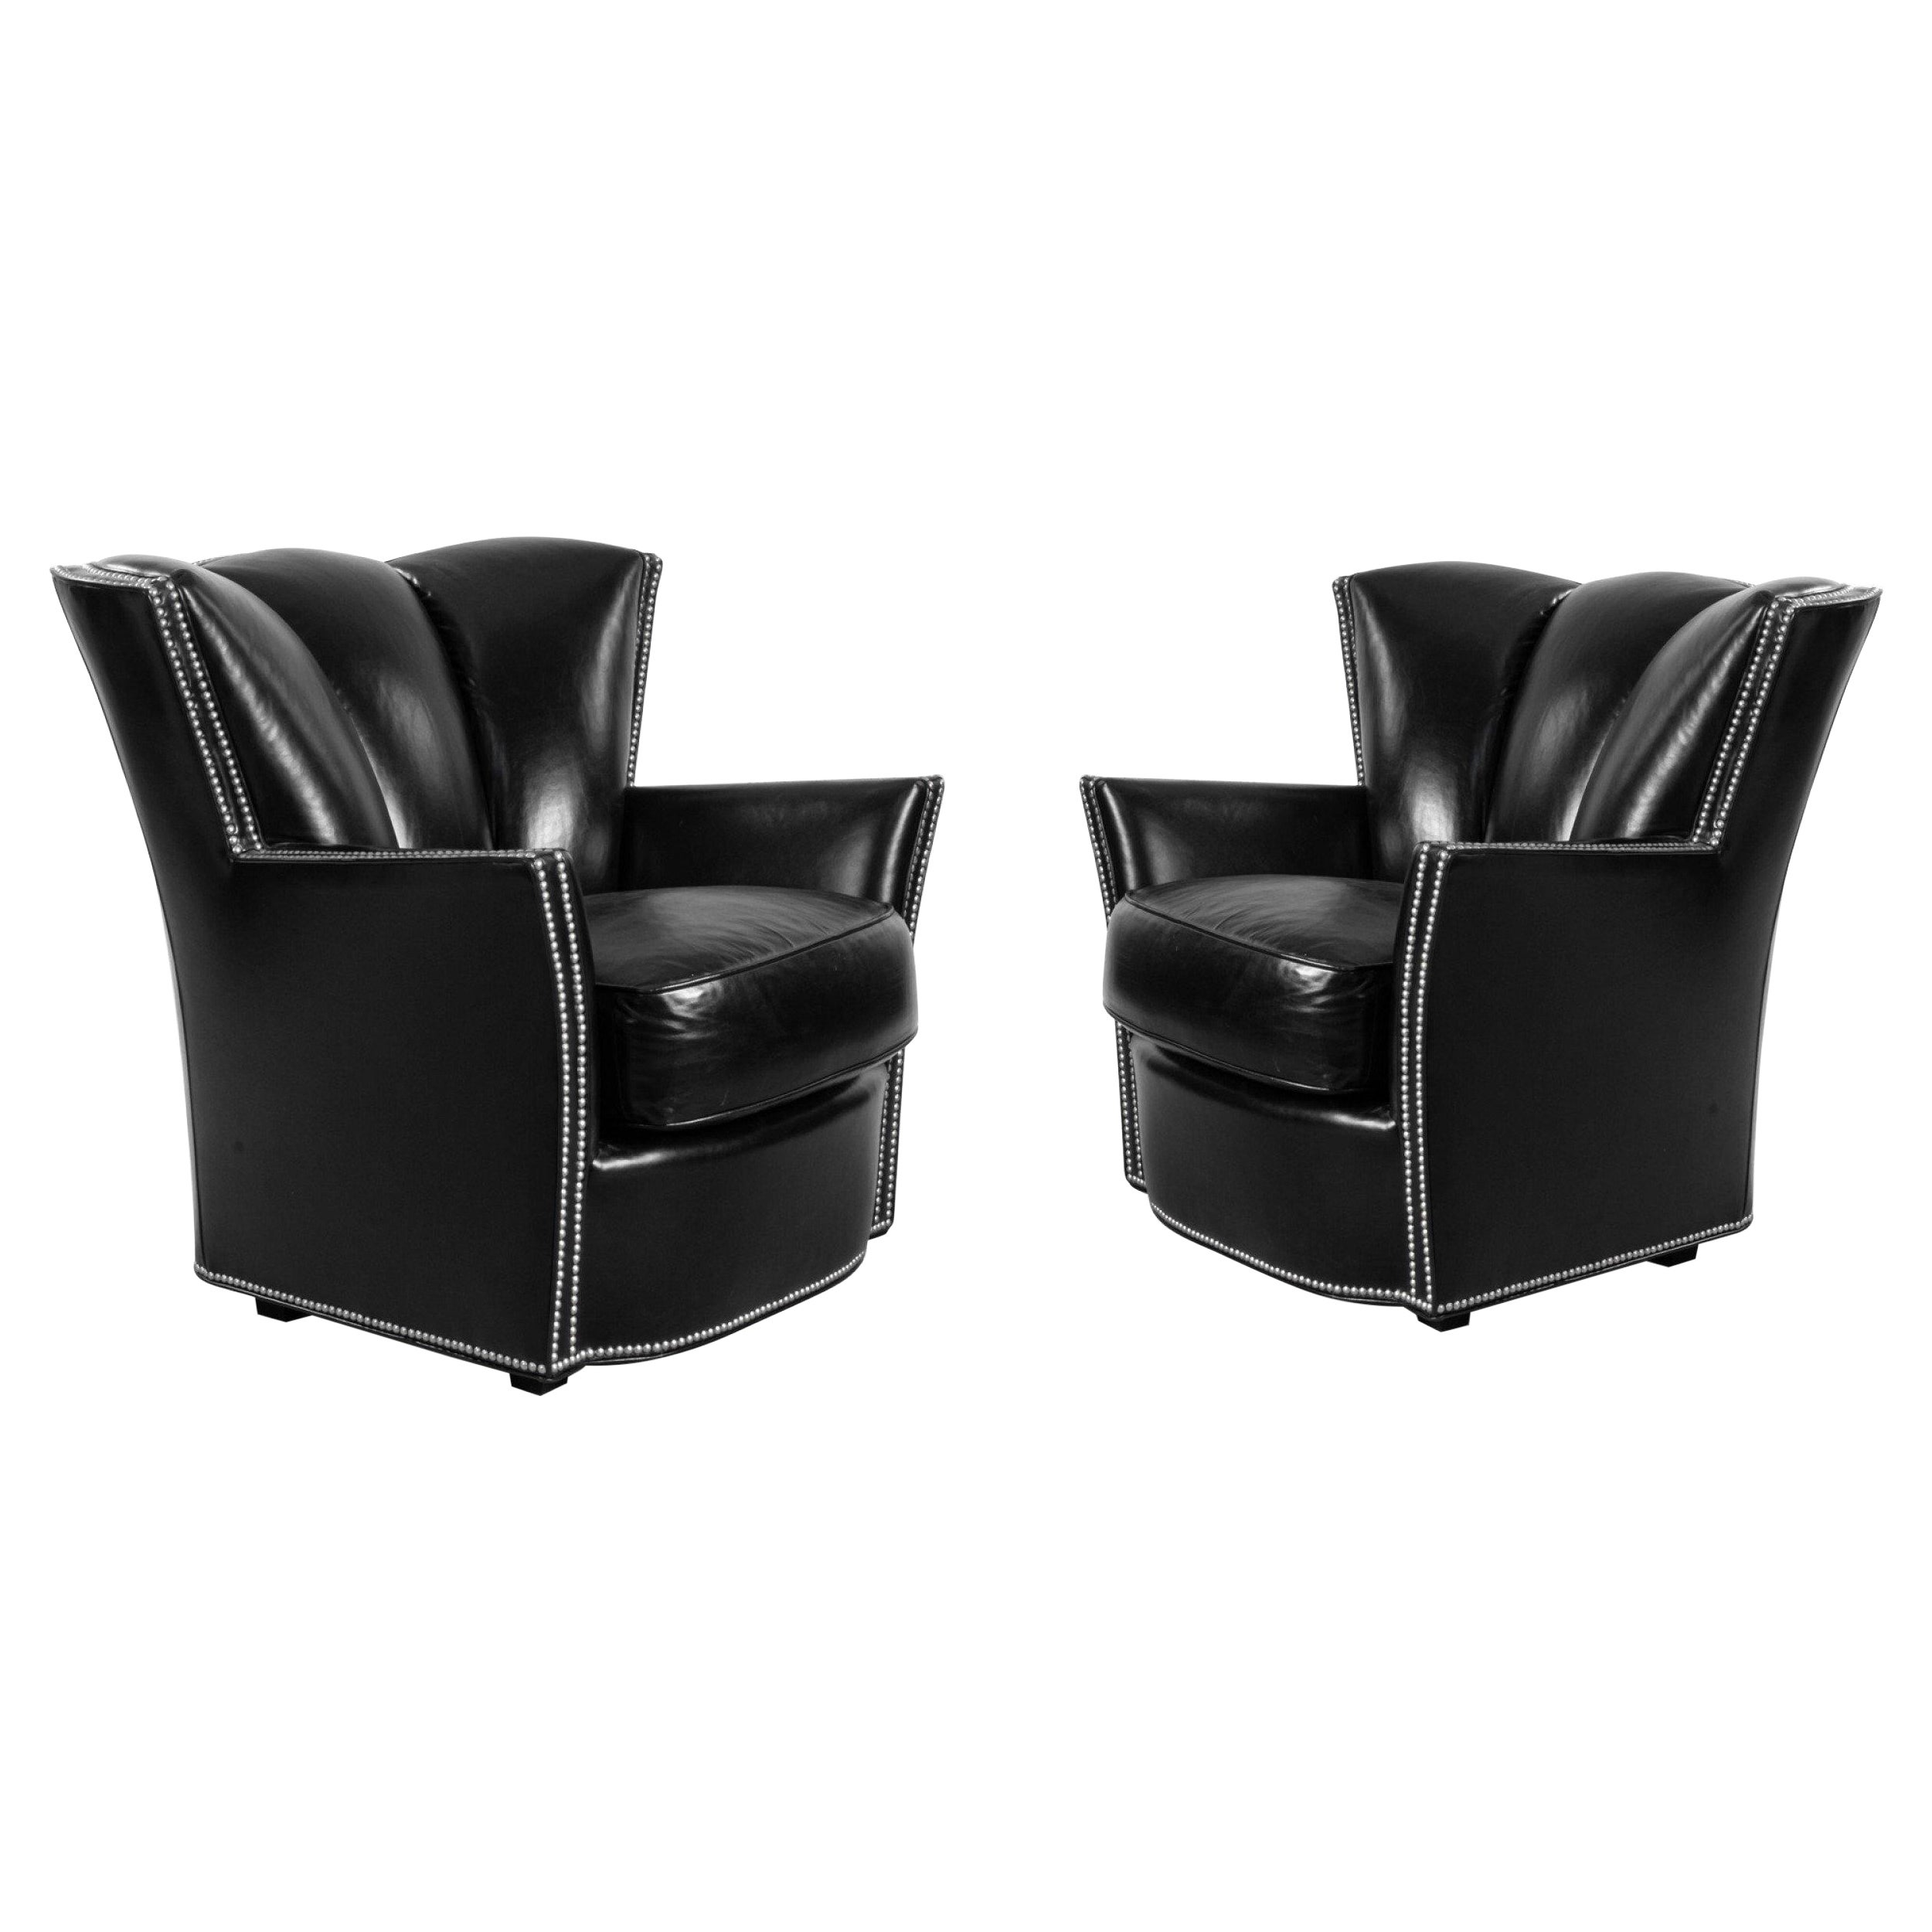 Pair of Contemporary Black Leather Studded Club Chairs For Sale